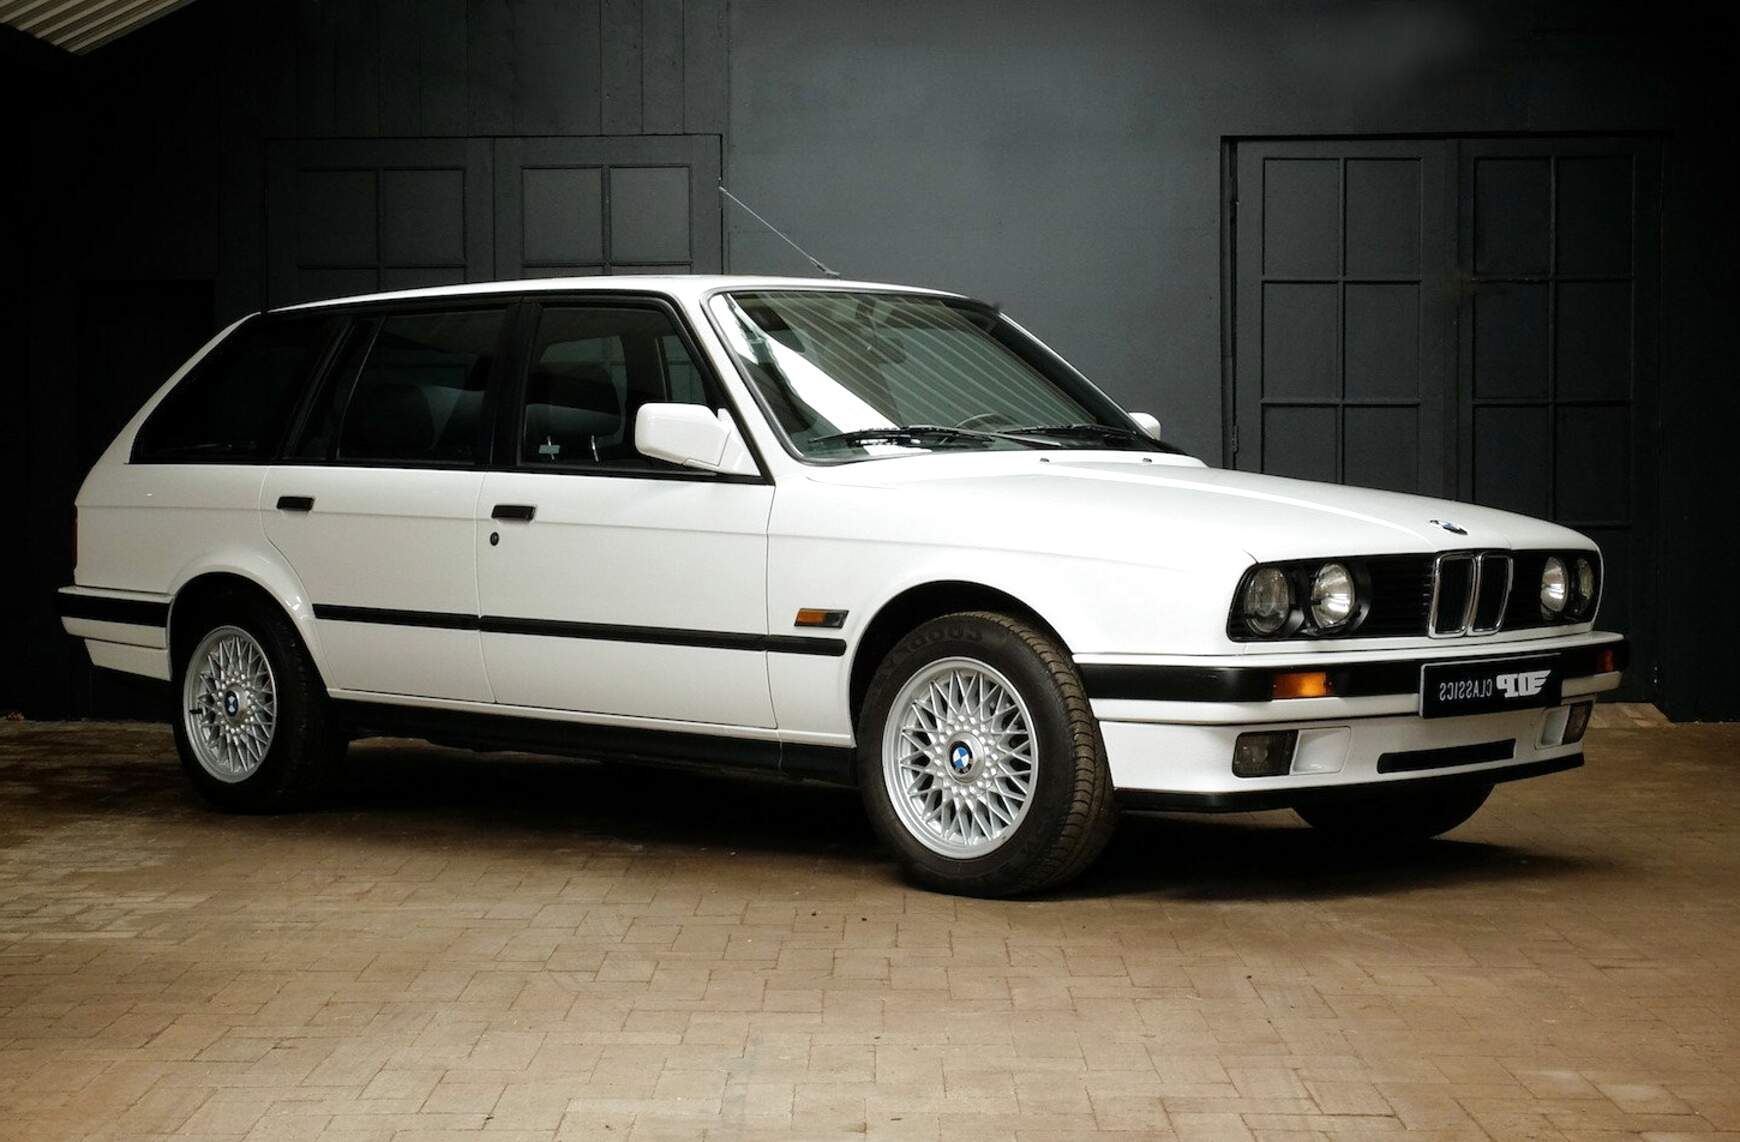 Bmw E30 Touring for sale in UK | 61 used Bmw E30 Tourings